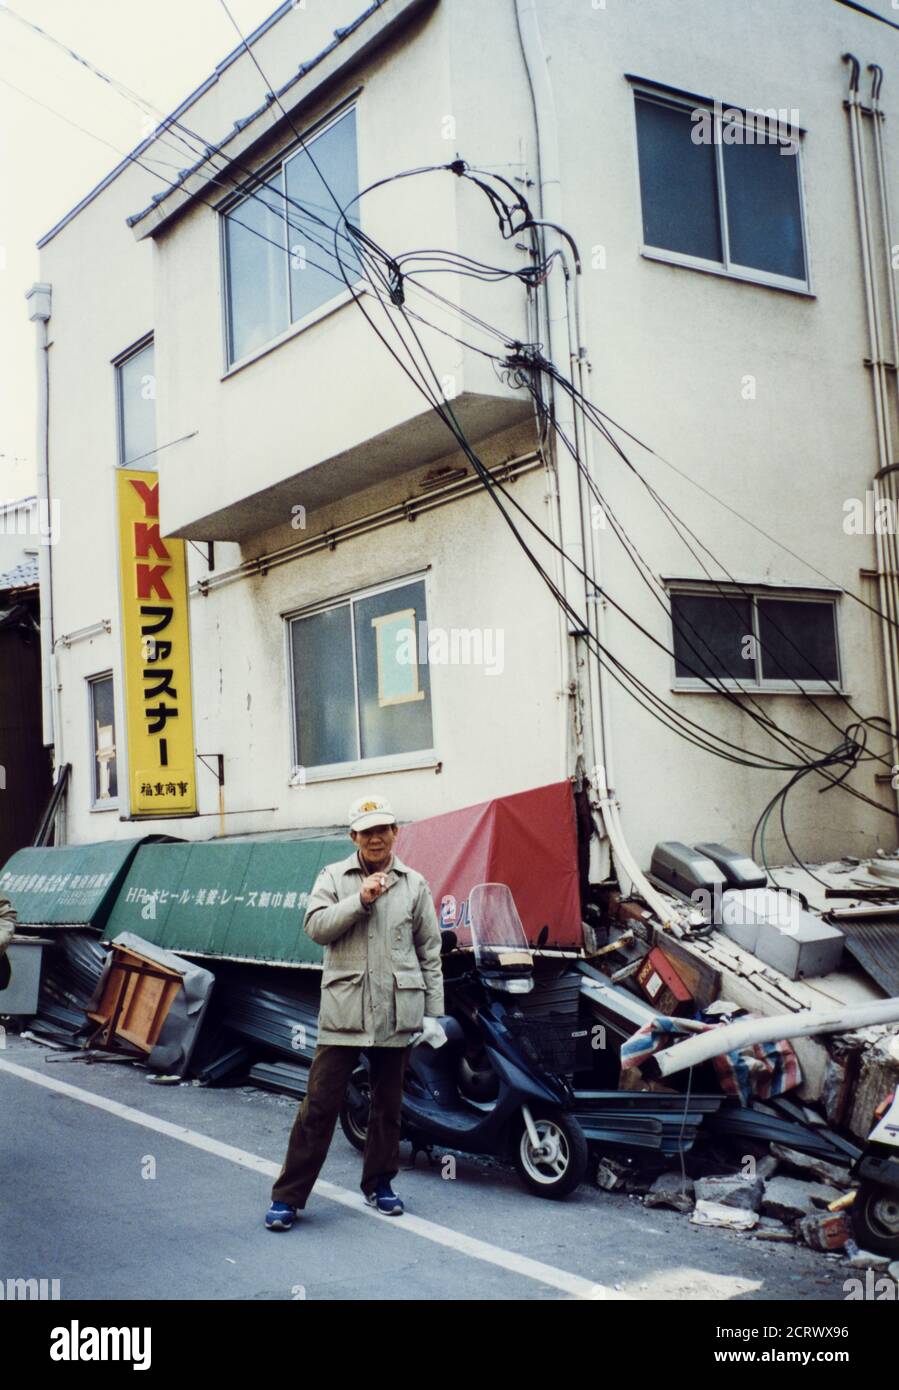 Man stands in front of YKK Fastner building collapsed from the damage caused by the 1995 Great Hanshin Earthquake in Kobe, Japan Stock Photo